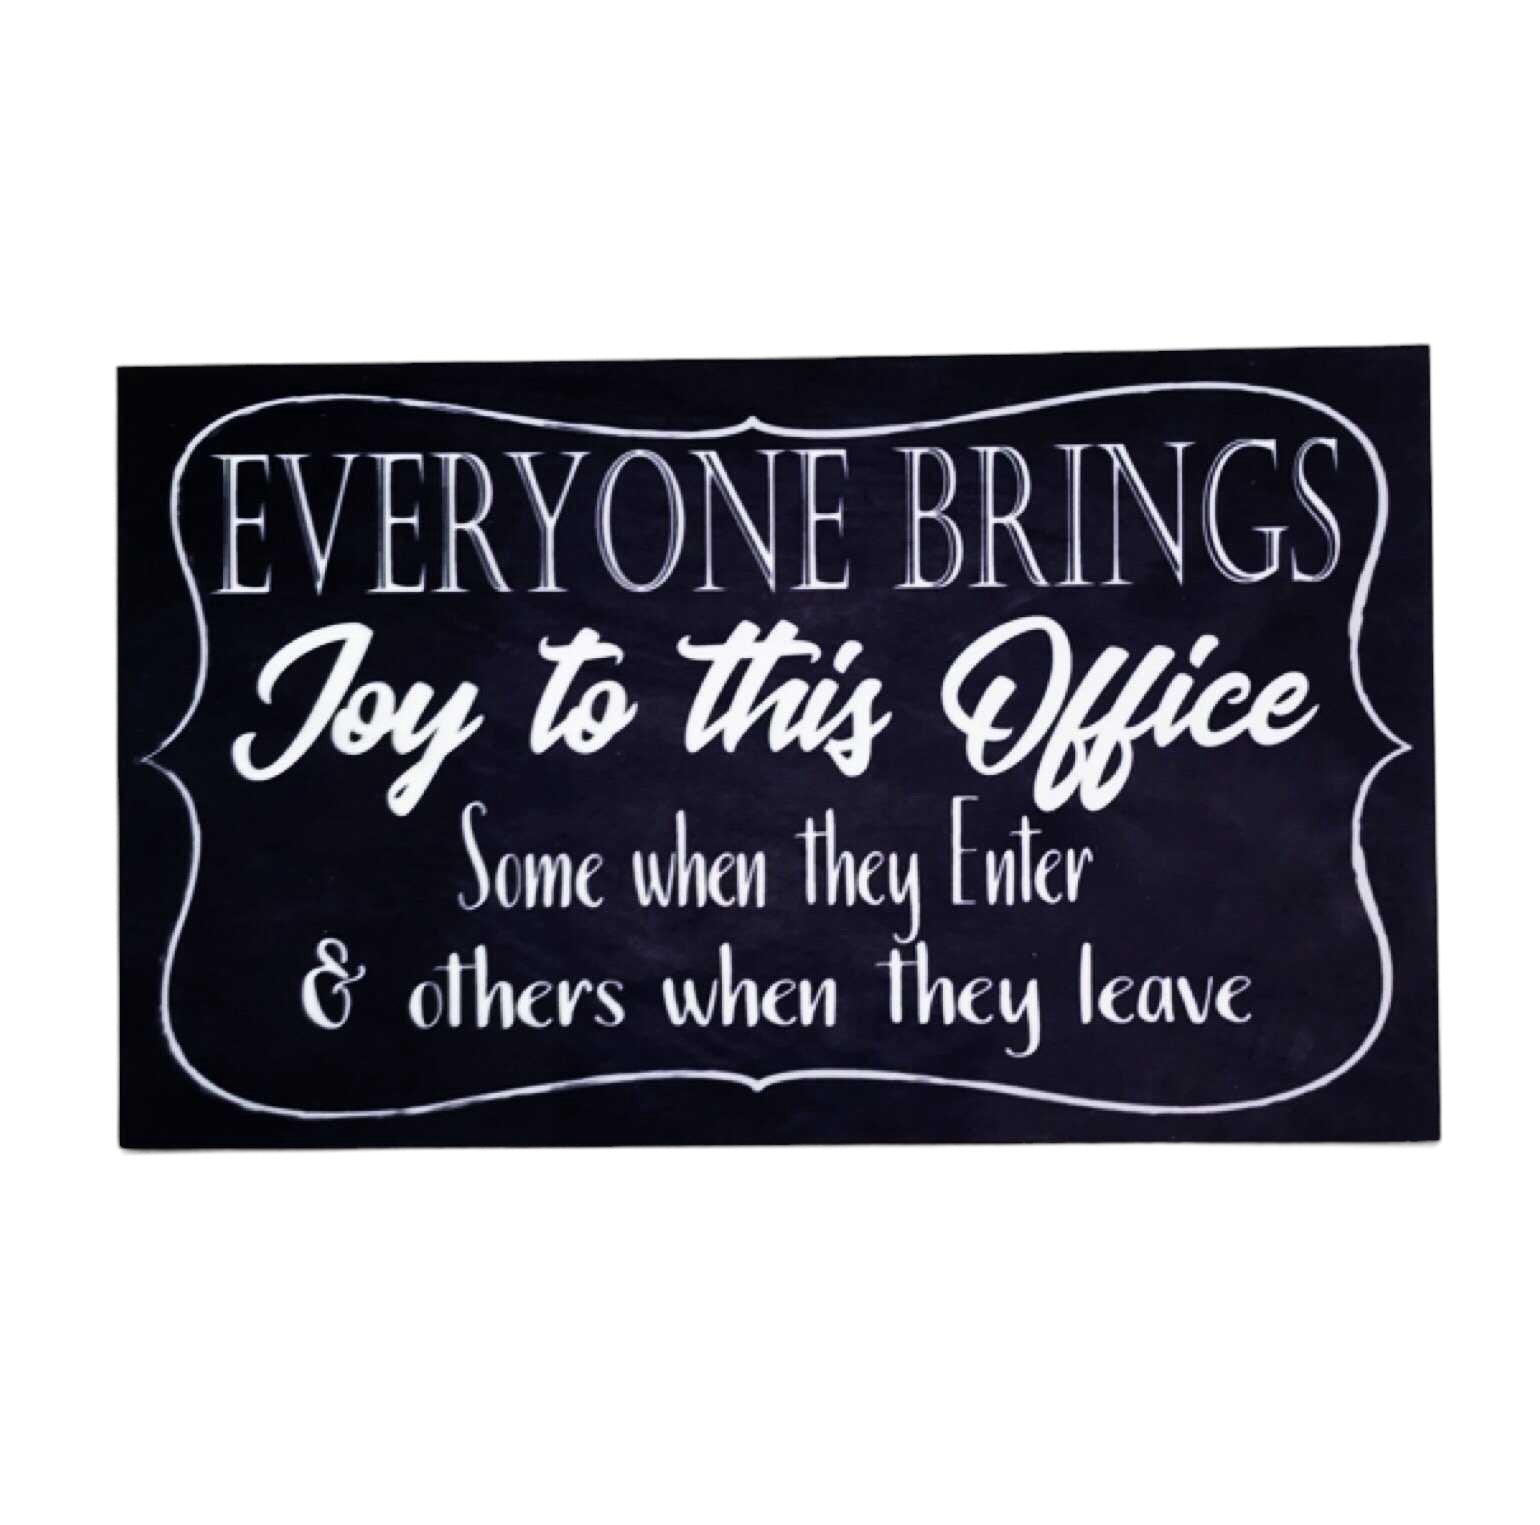 Everyone Brings Joy funny Office Black Sign - The Renmy Store Homewares & Gifts 